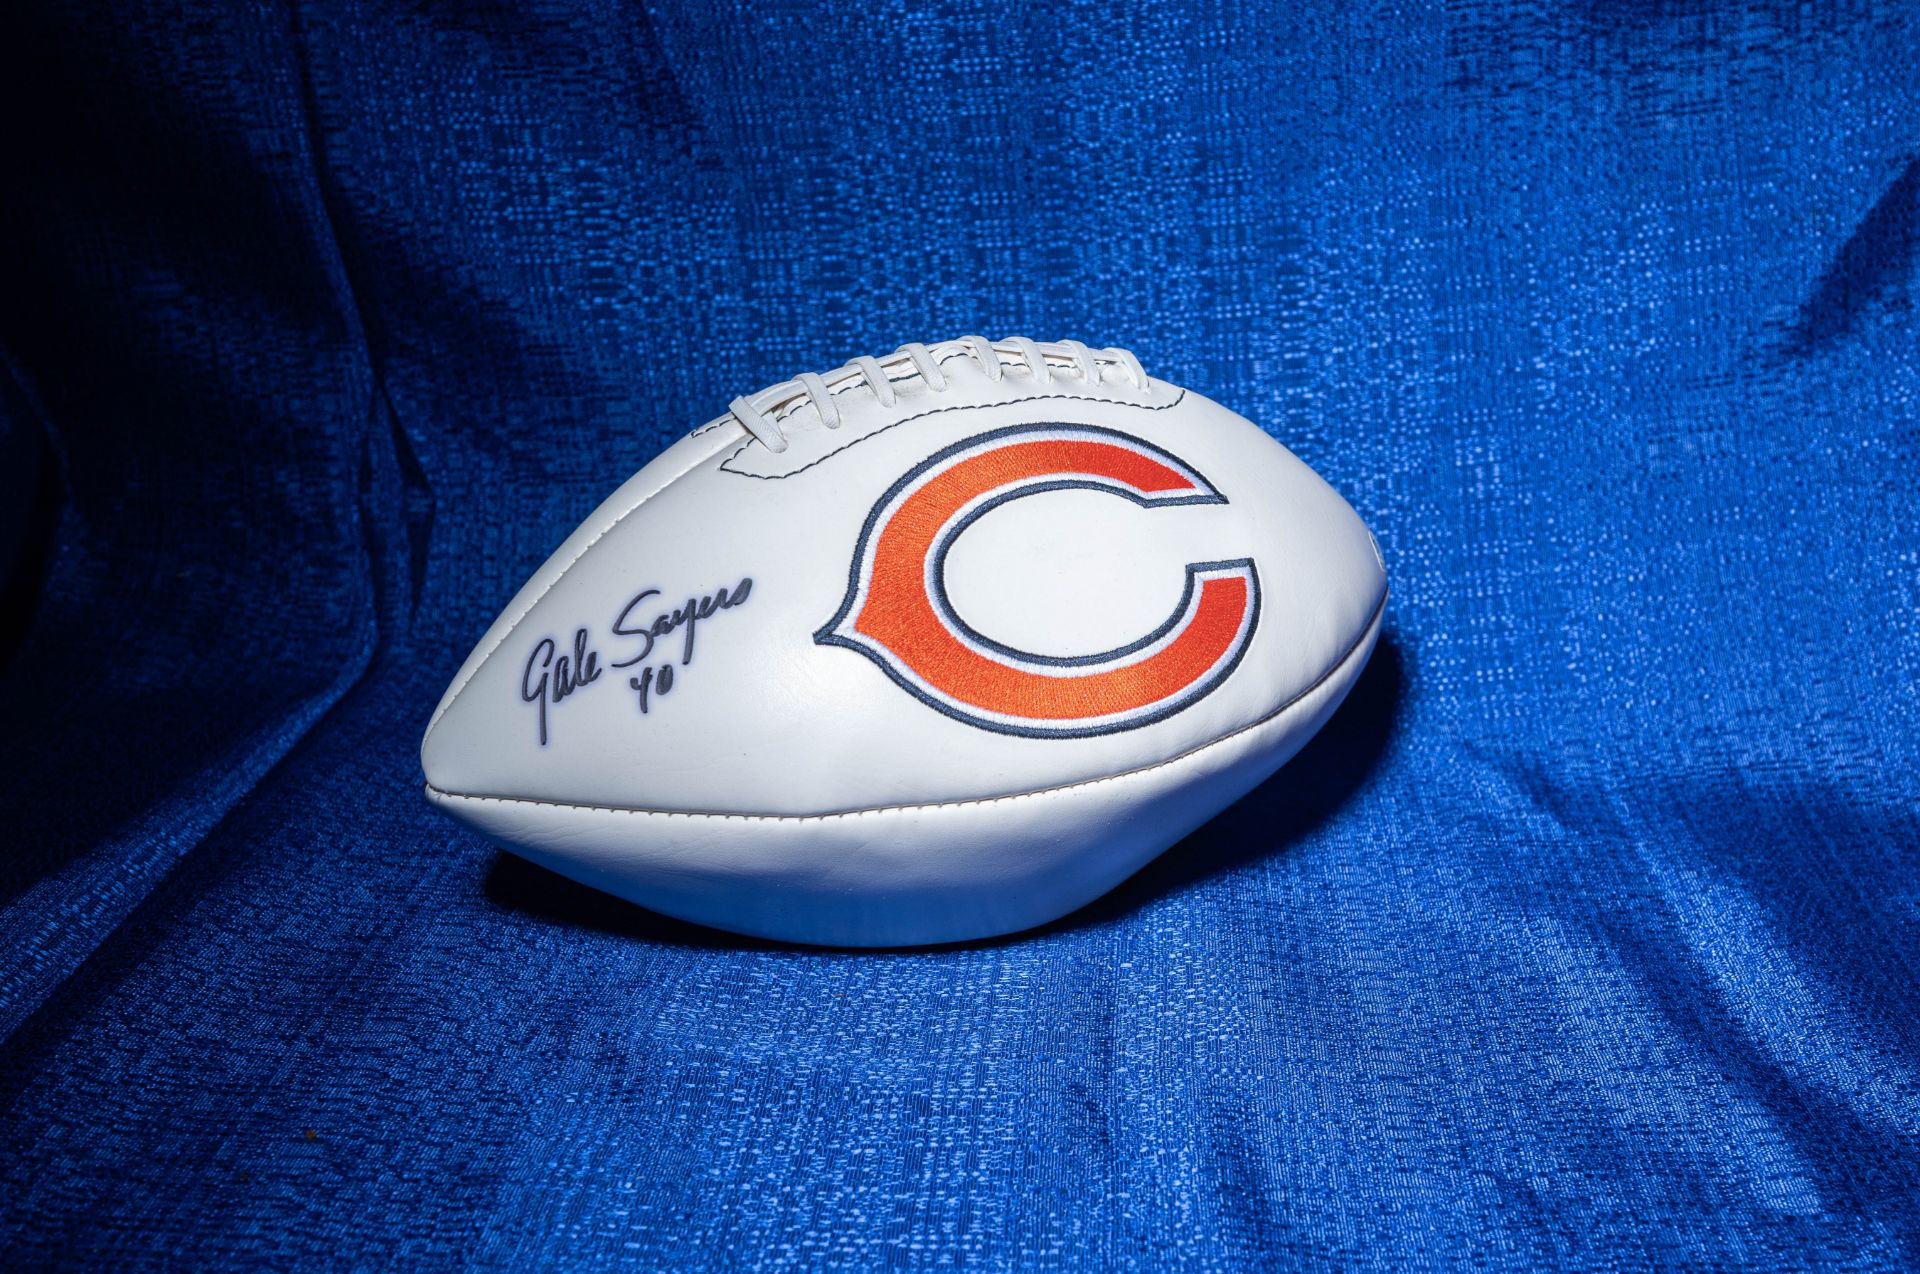 Gayle Sayers Football Signed "Gayle Sayers 40"